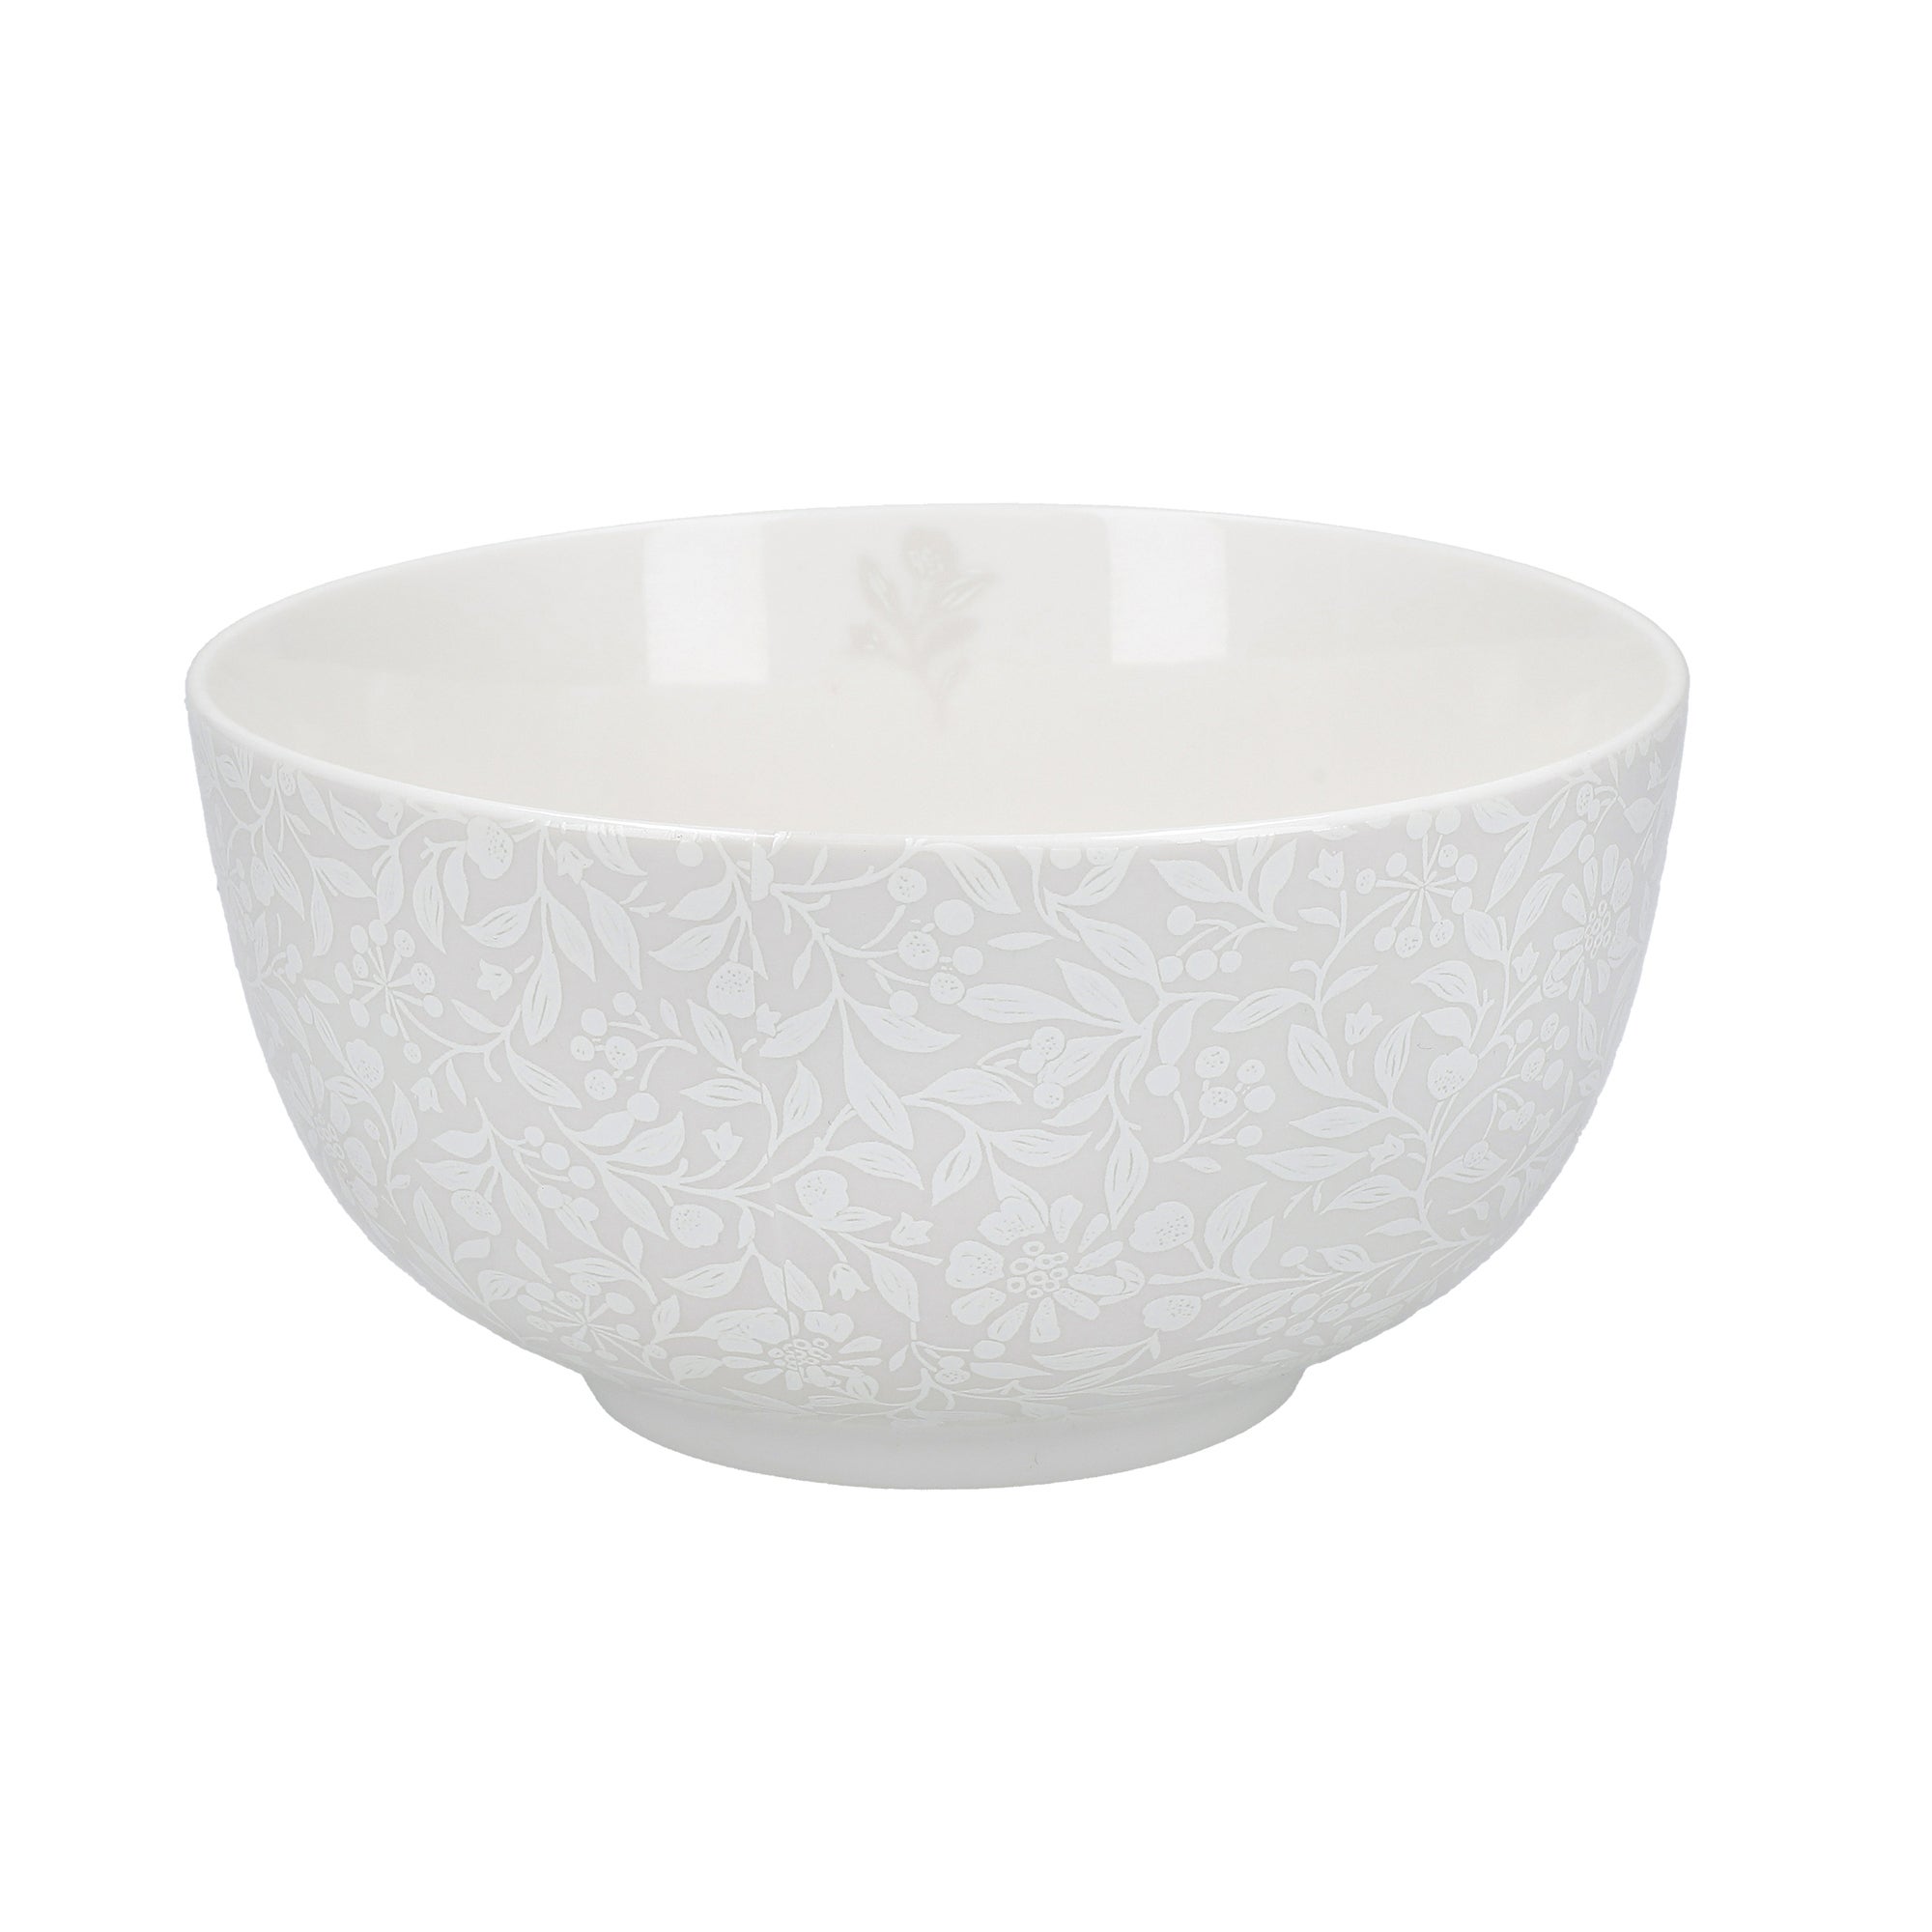 Chartwell Cereal Bowl | Dunelm